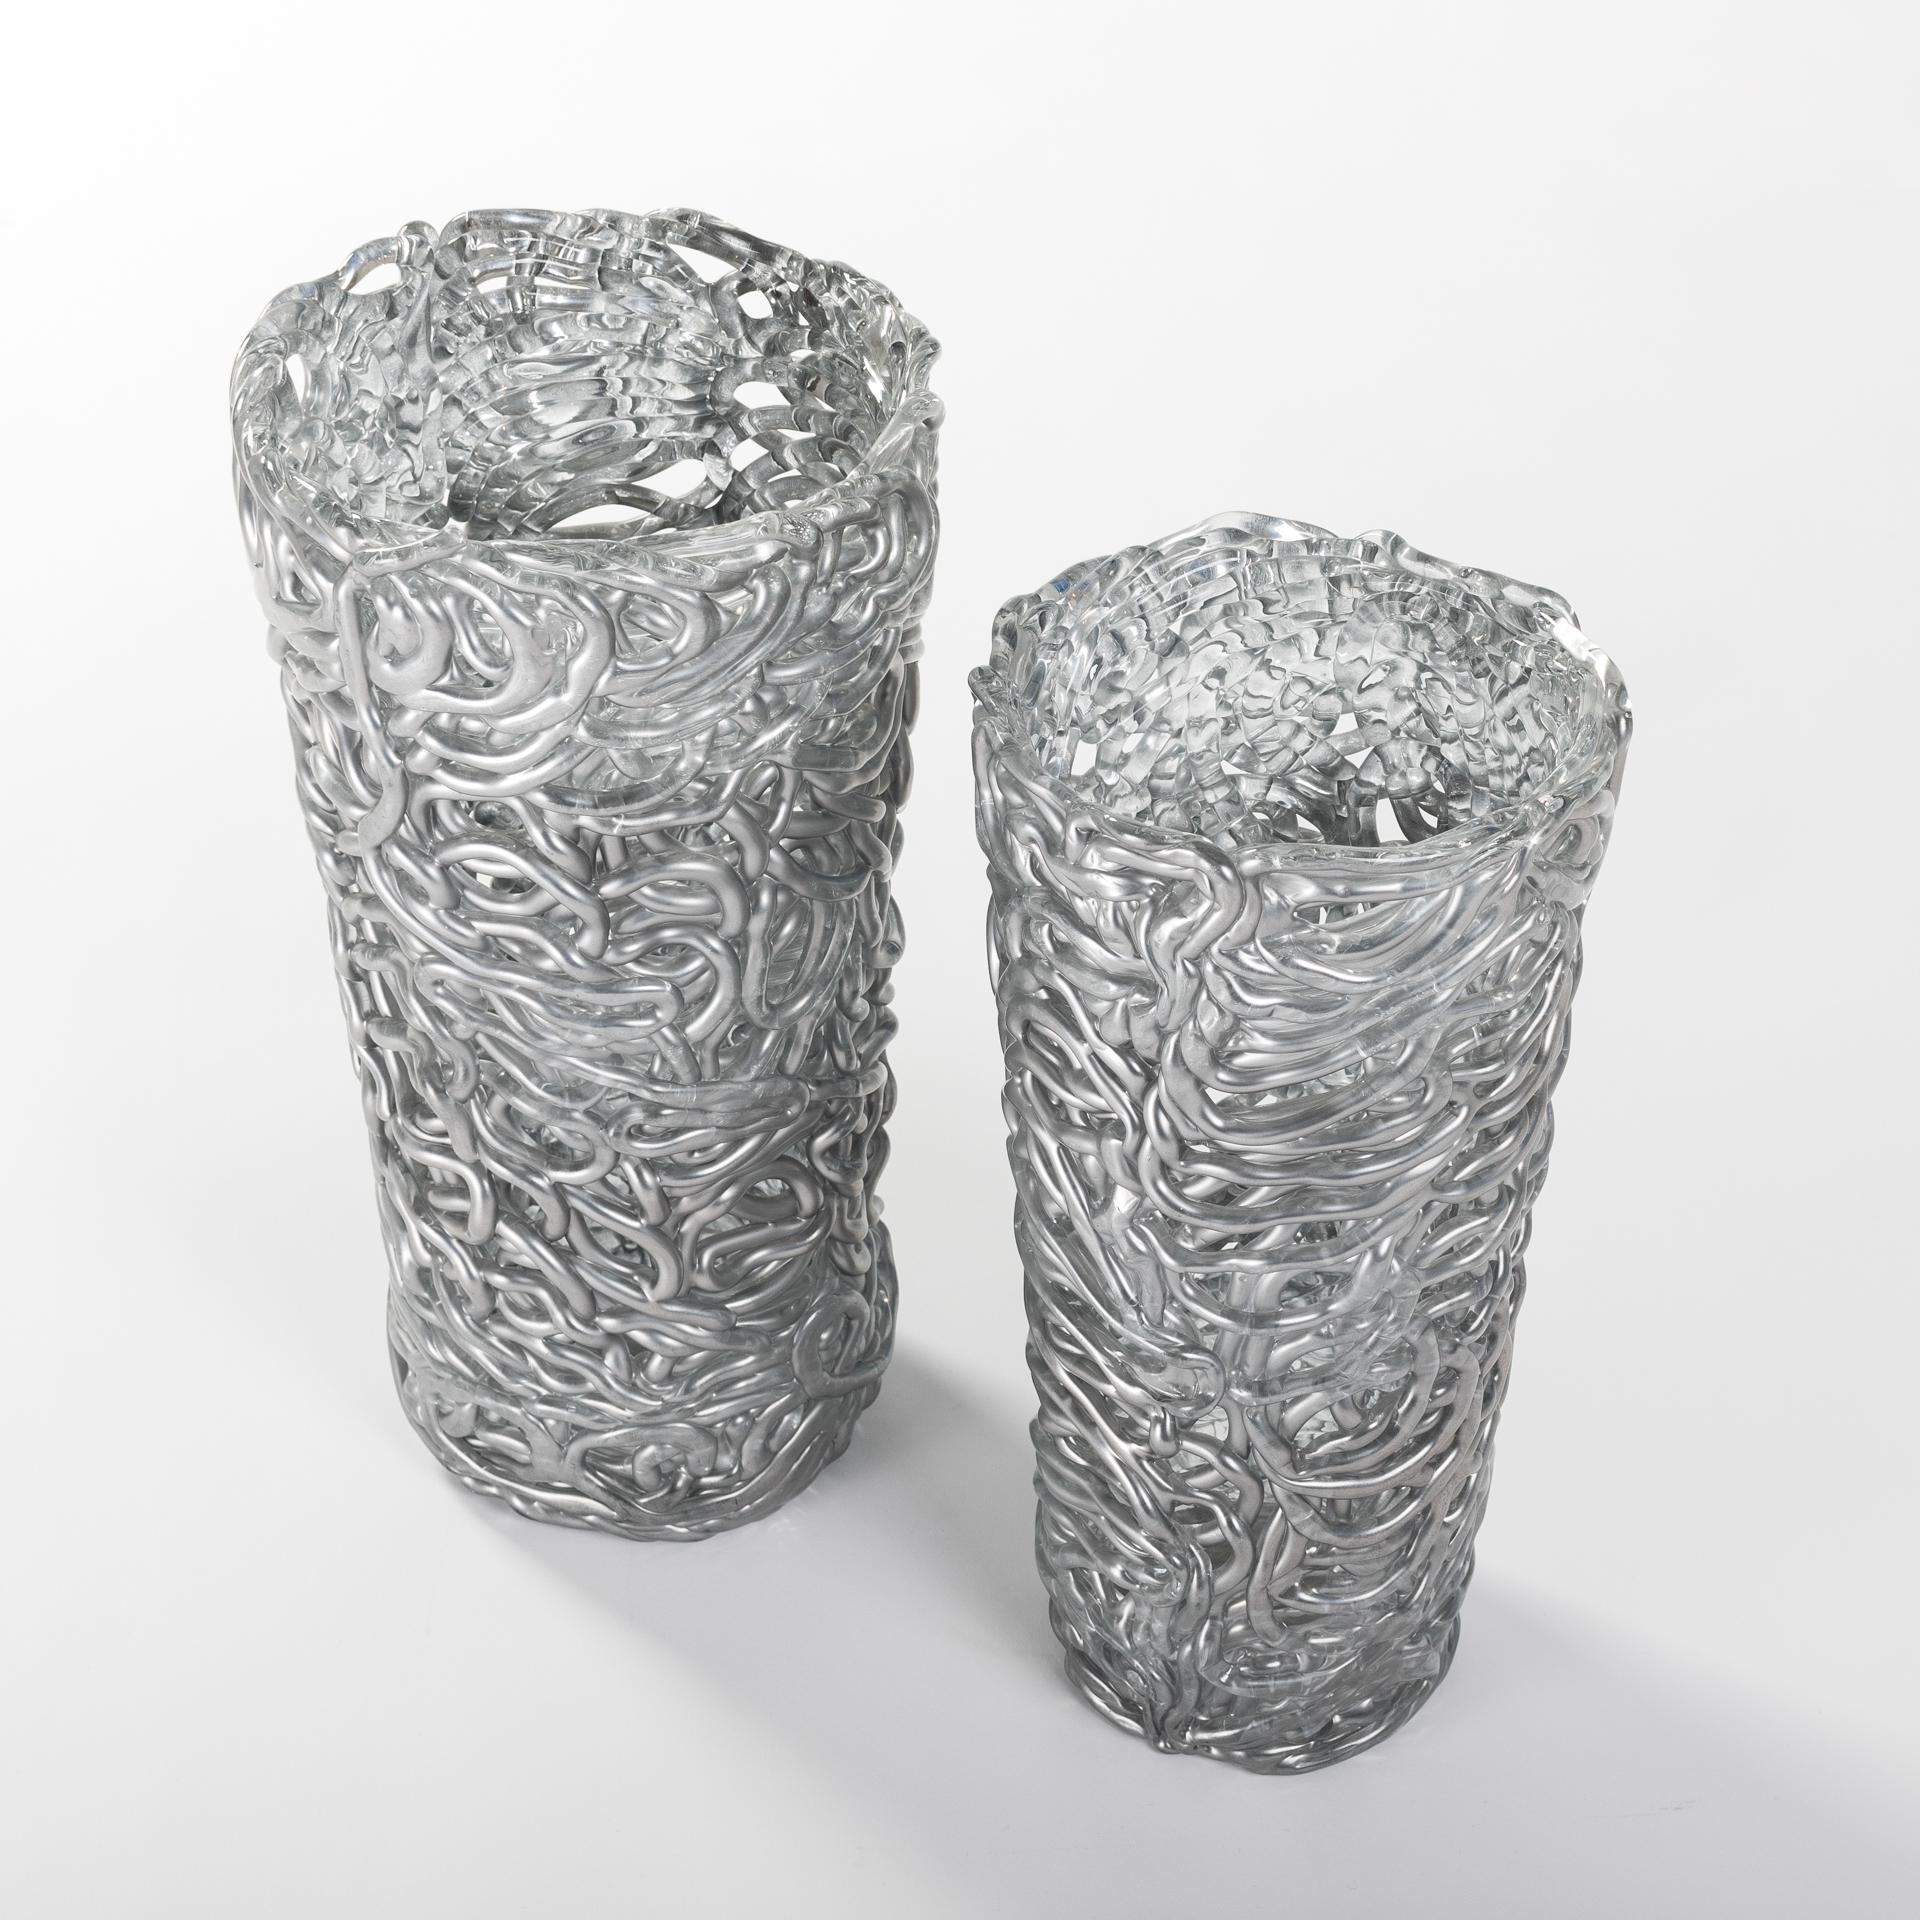 Italian Pair of Midcentury Silver-Colored Murano Glass Vases out of Glass Veins For Sale